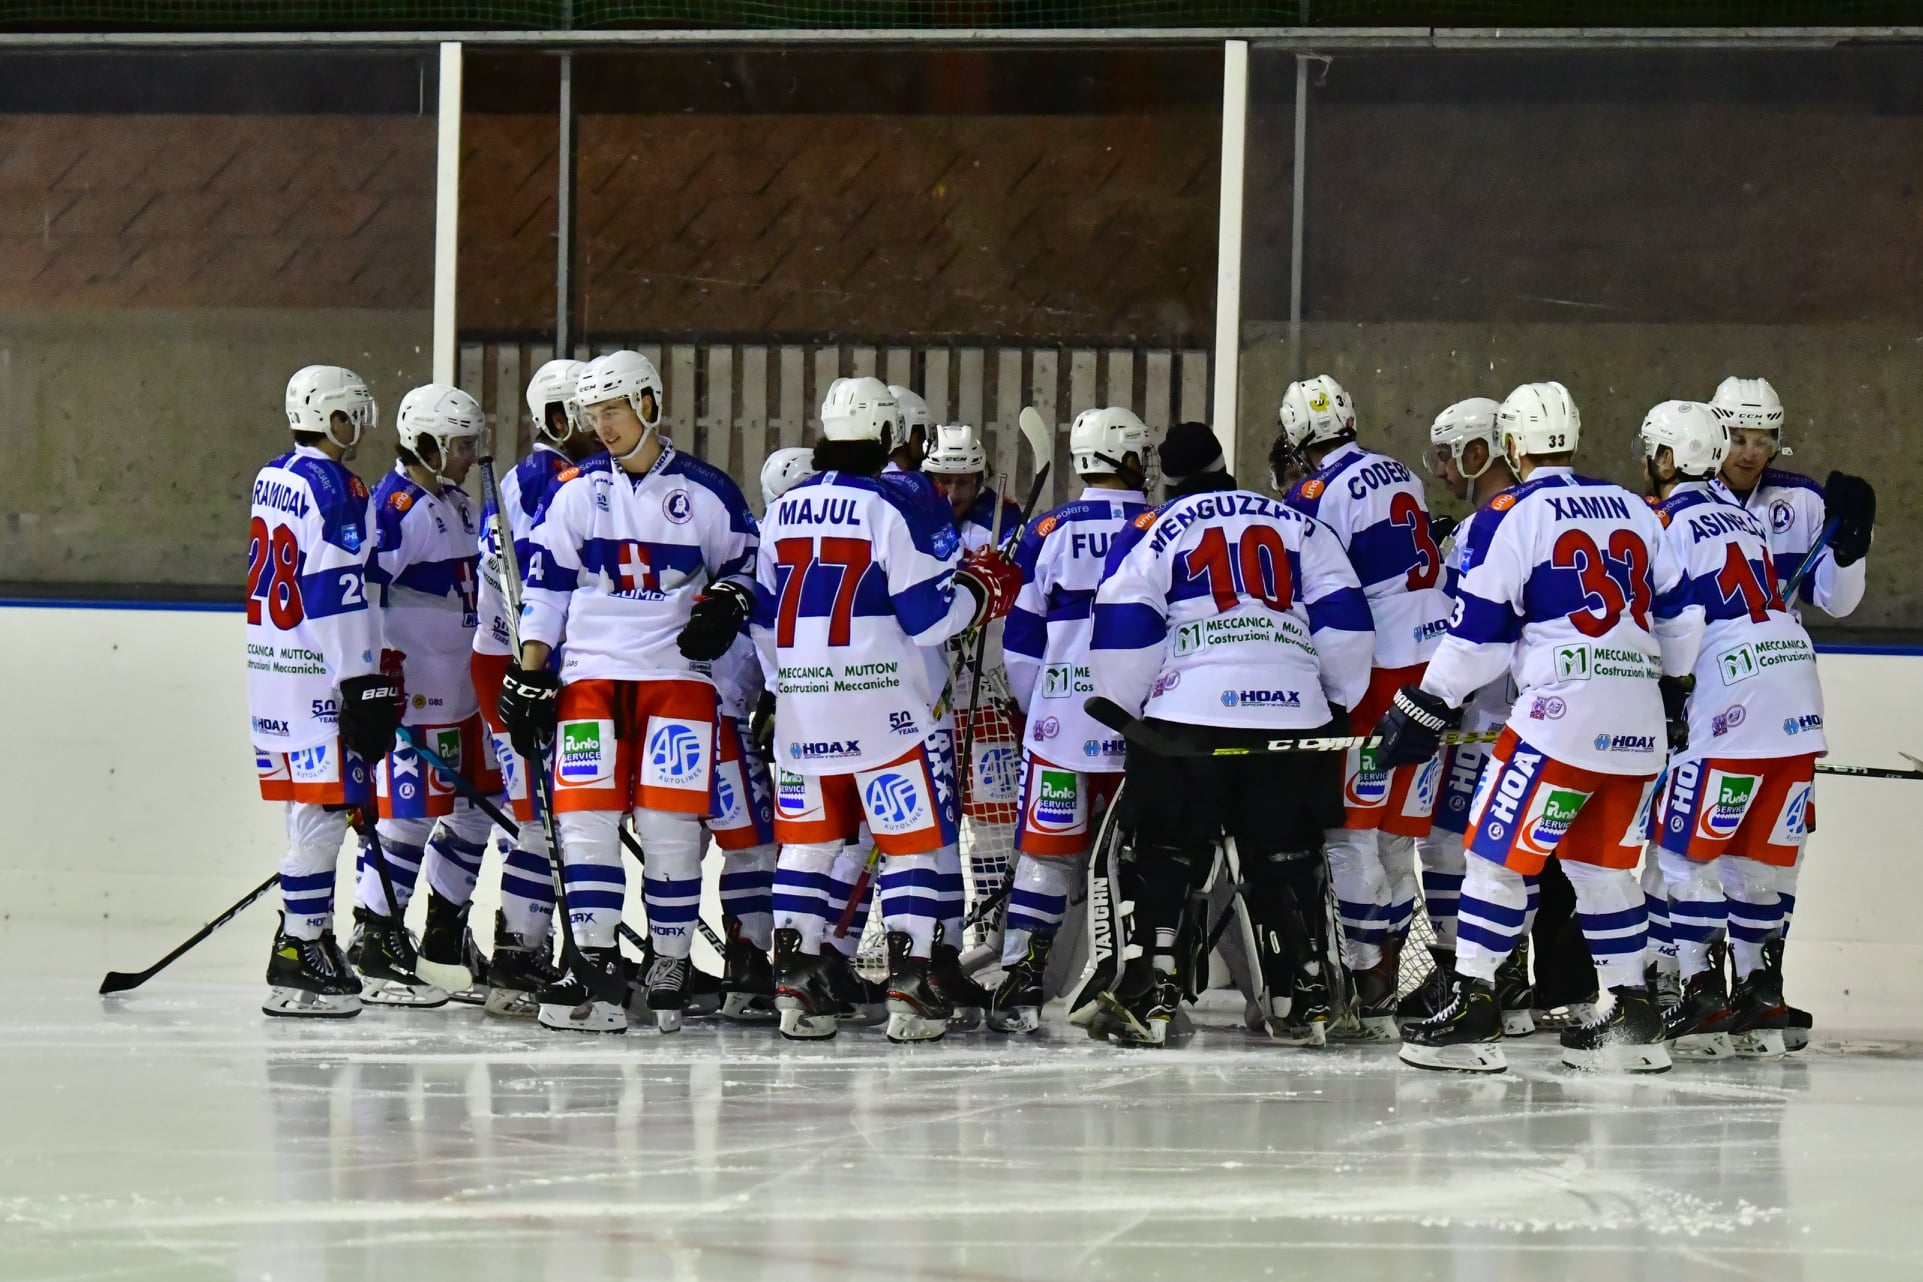 Como hockey game “Green Line” for the first biancobl team with young Pietro Maradi and Riccardo Novati